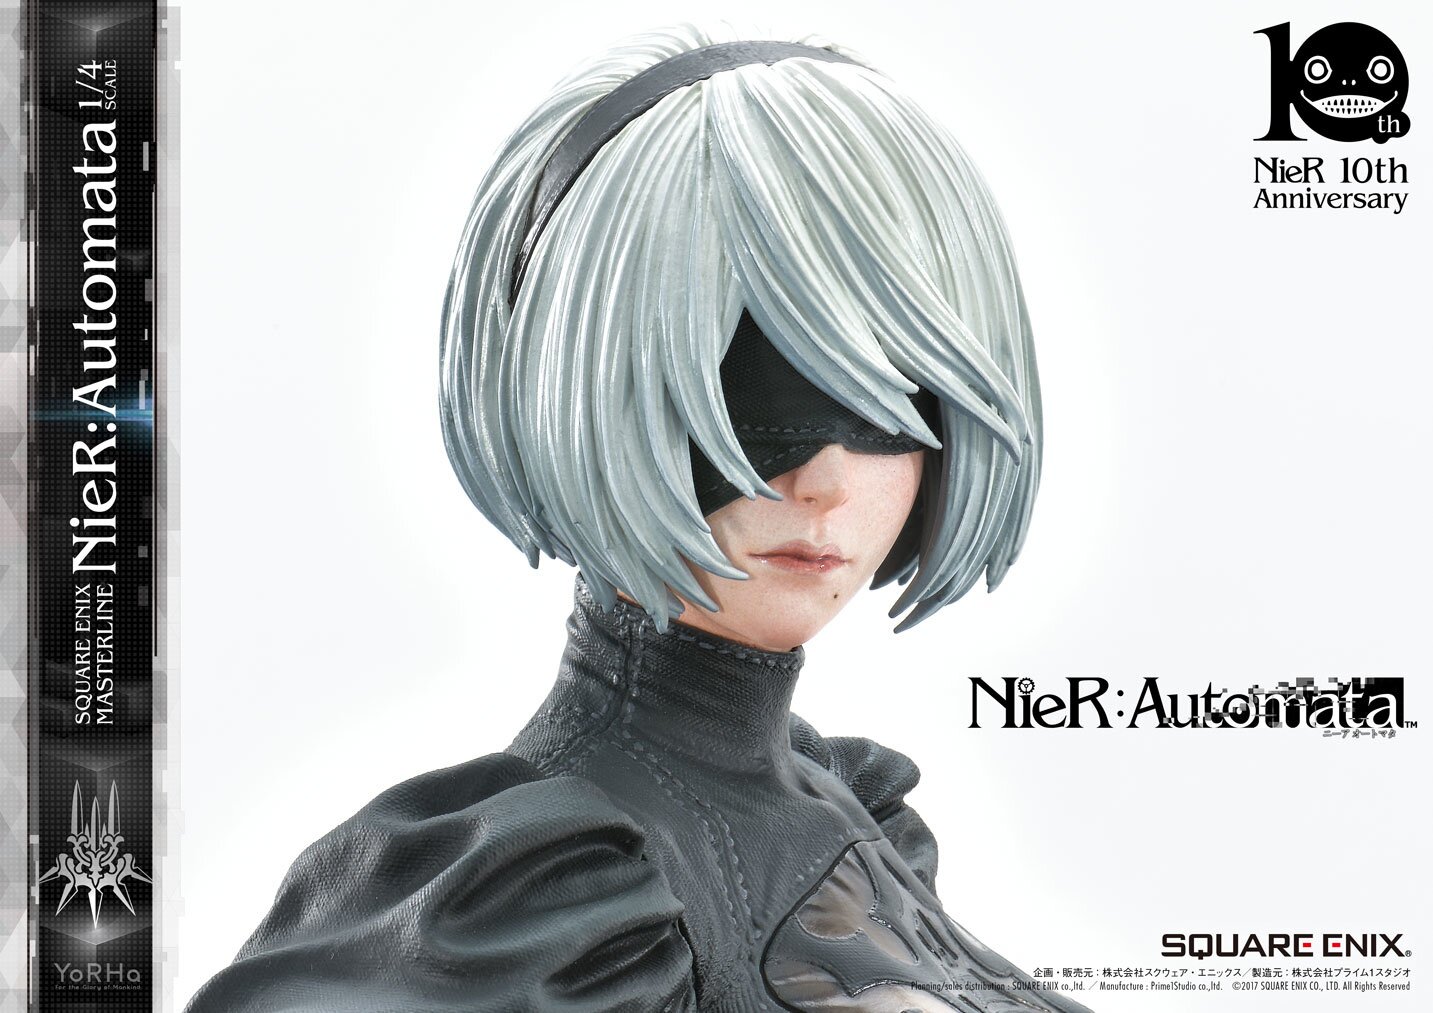 NieR: Automata Masterline Statue Featuring 2B, 9S, and A2 Revealed by Square  Enix - Siliconera